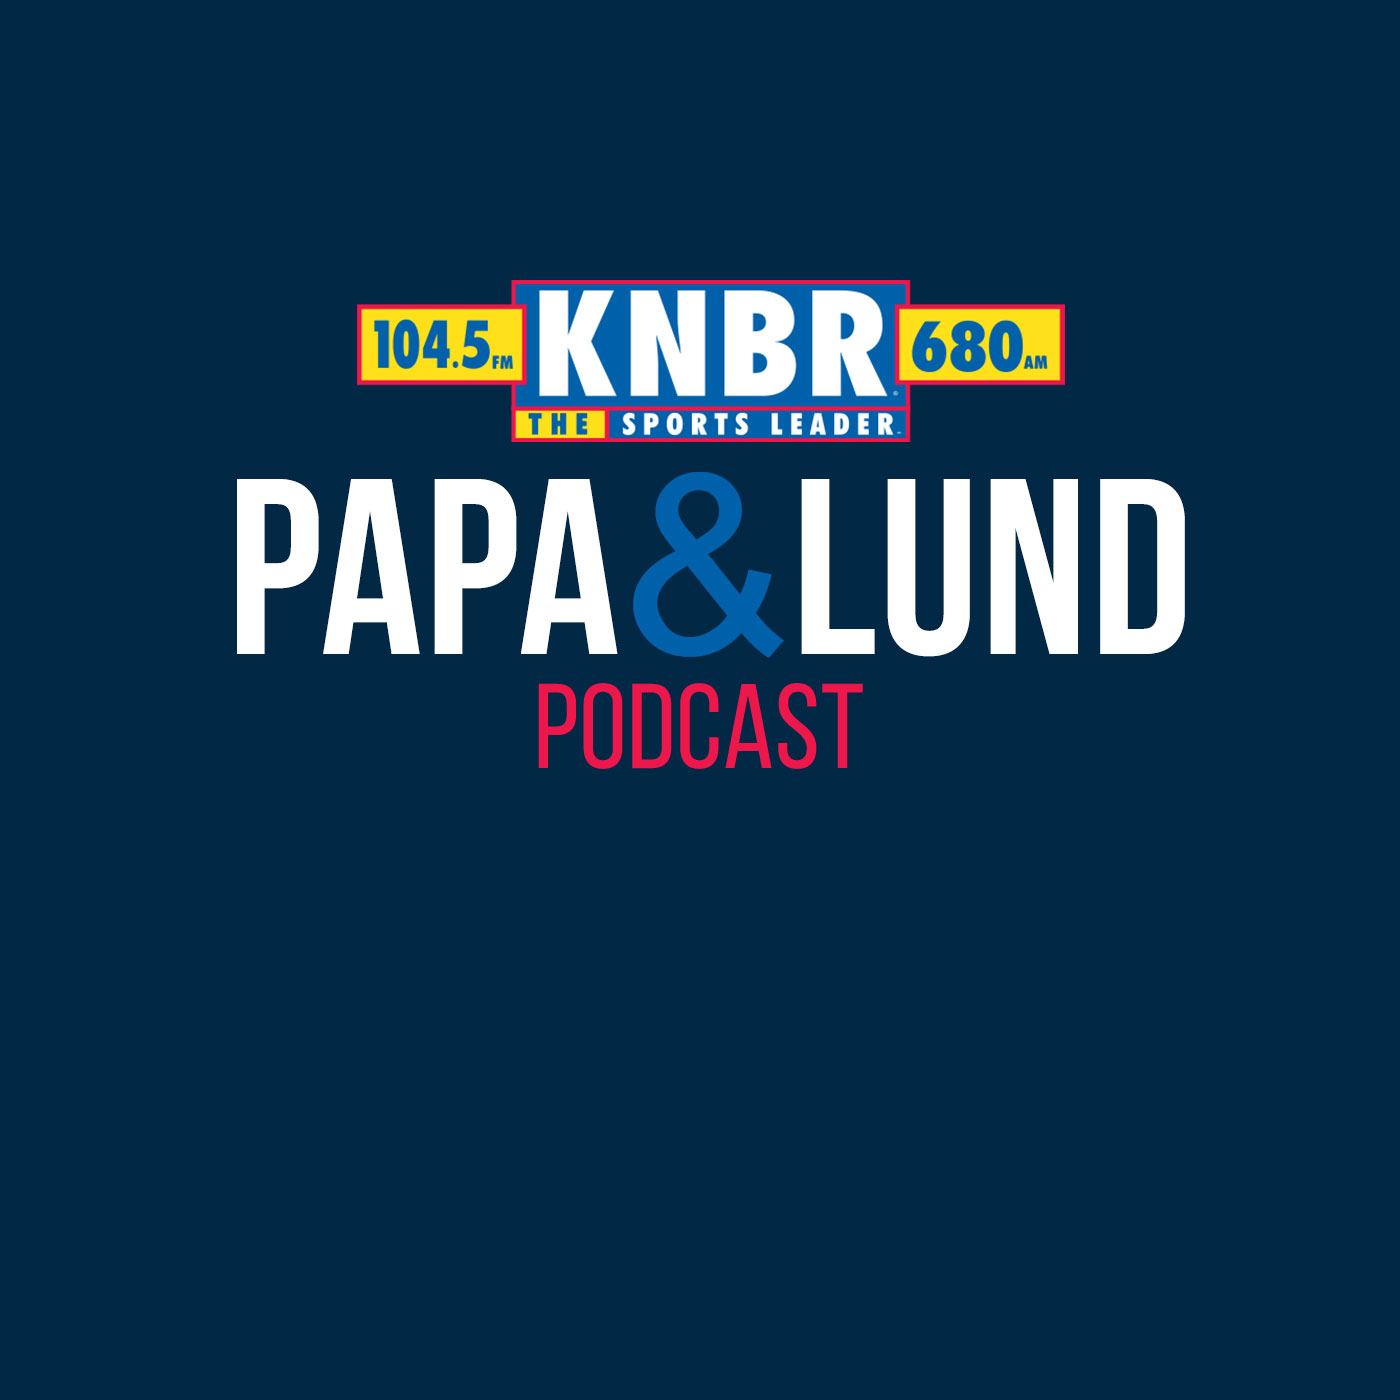 11-8 Brandon Payne joins Papa & Lund to discuss Steph Curry's conditioning level after a late-game surge to help the Warriors pull off a win against the Kings